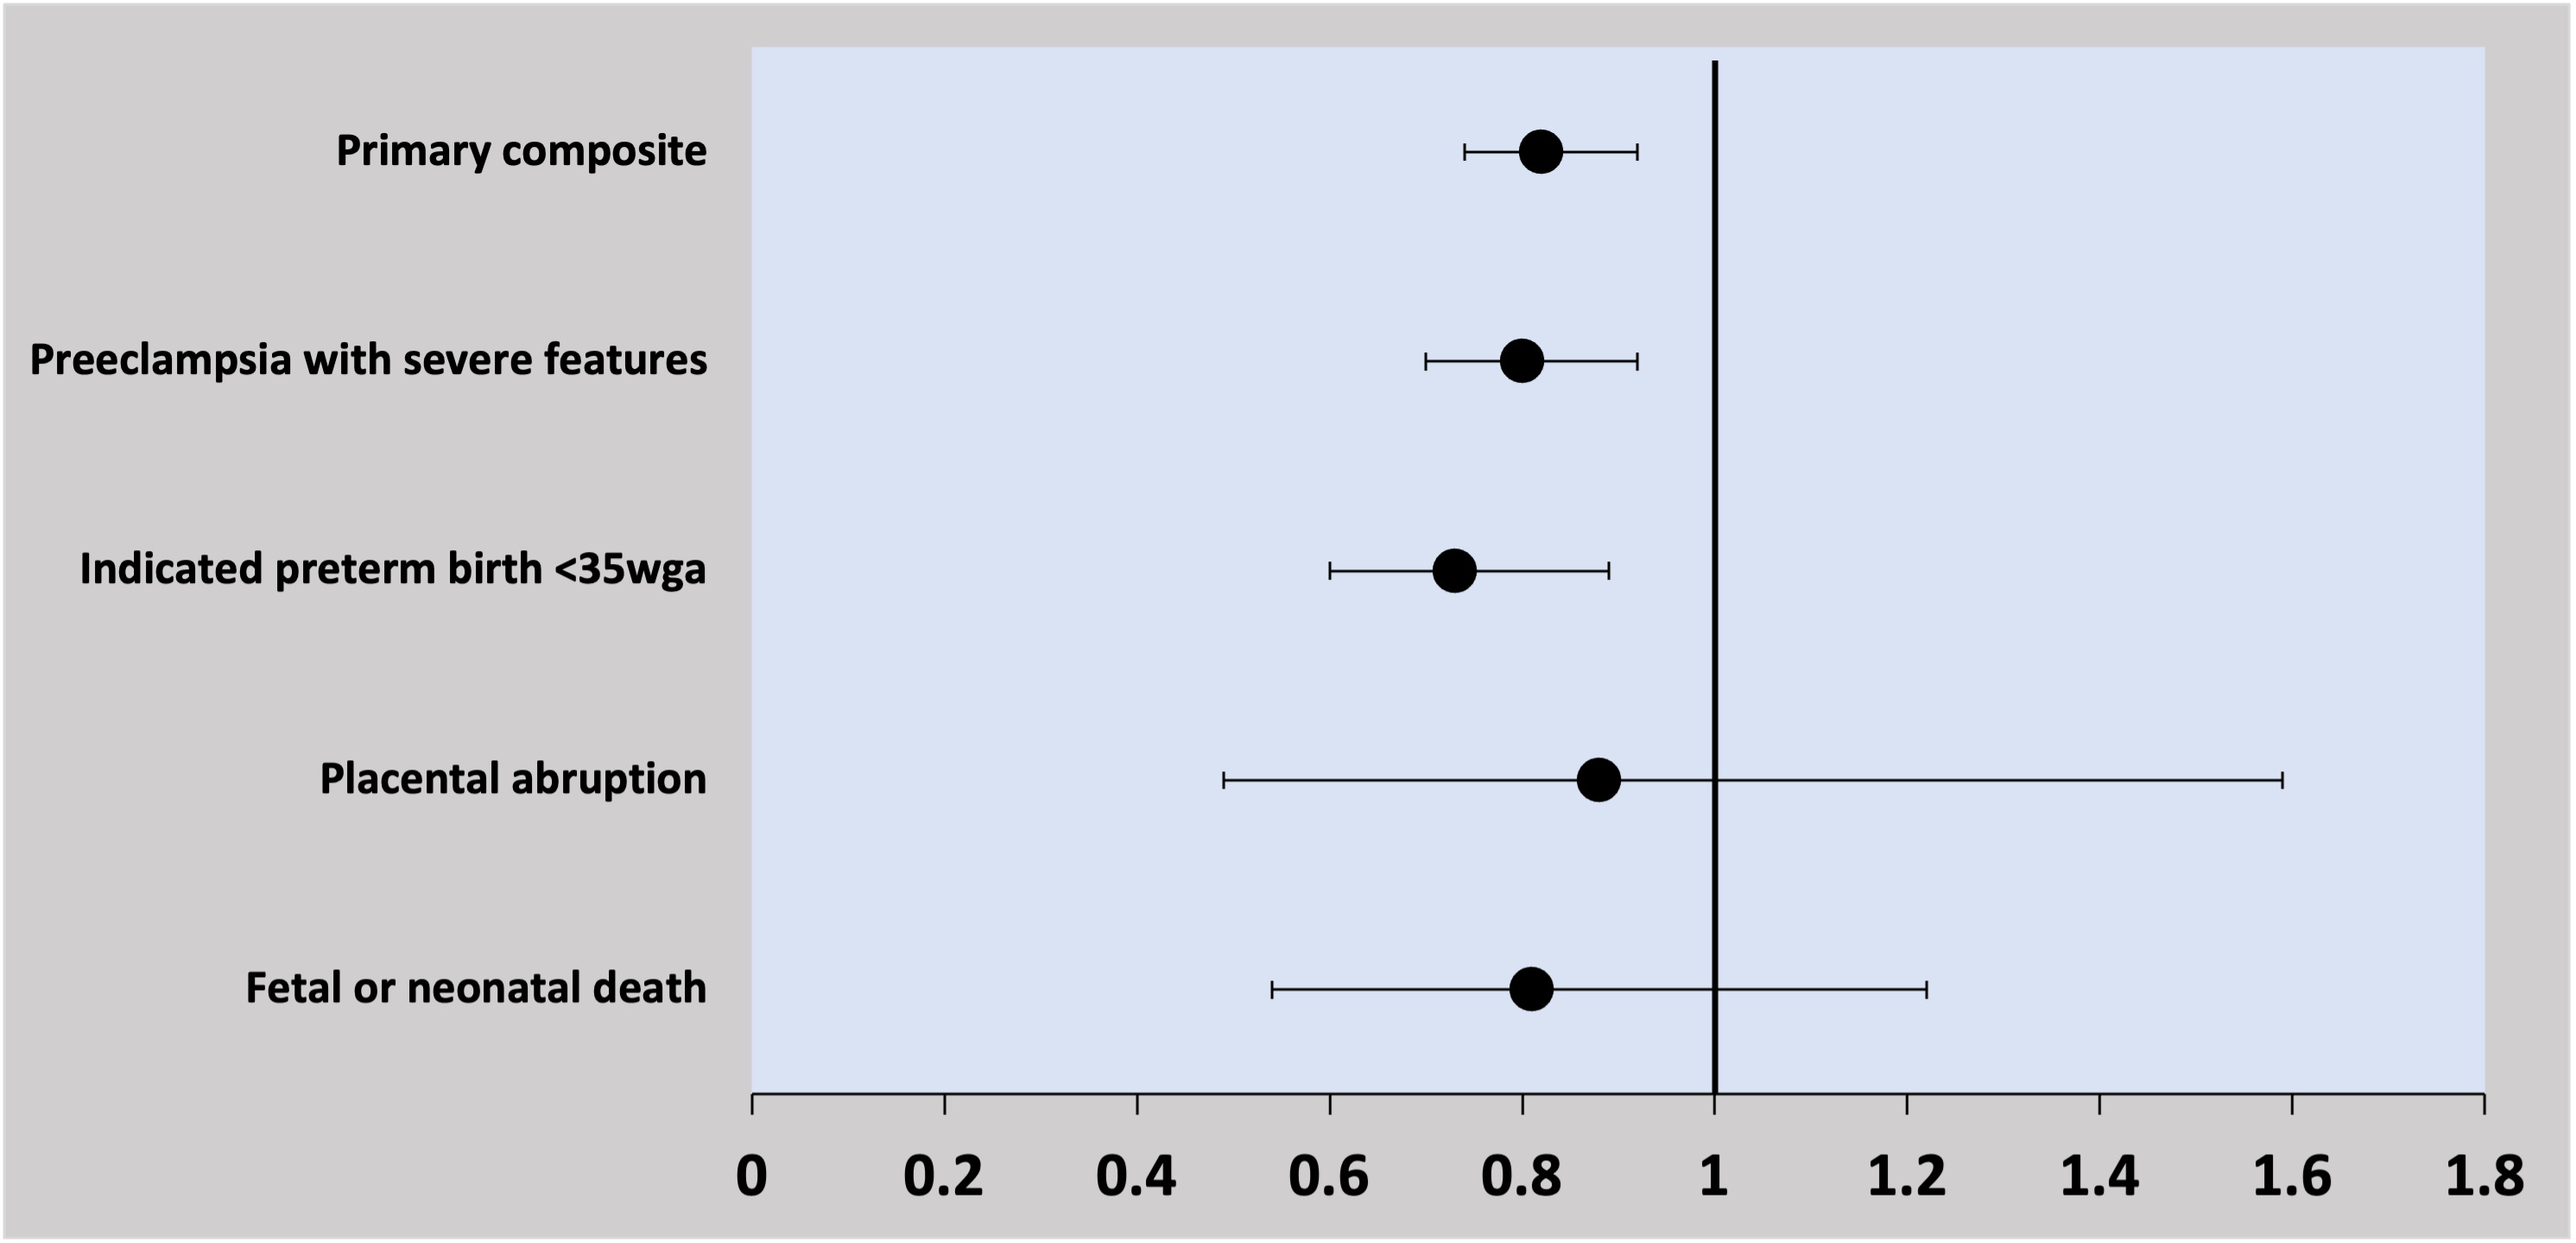 FIGURE 2. Outcomes of Treatment of Mild Chronic Hypertension During Pregnancy34

wga, weeks’ gestational age.